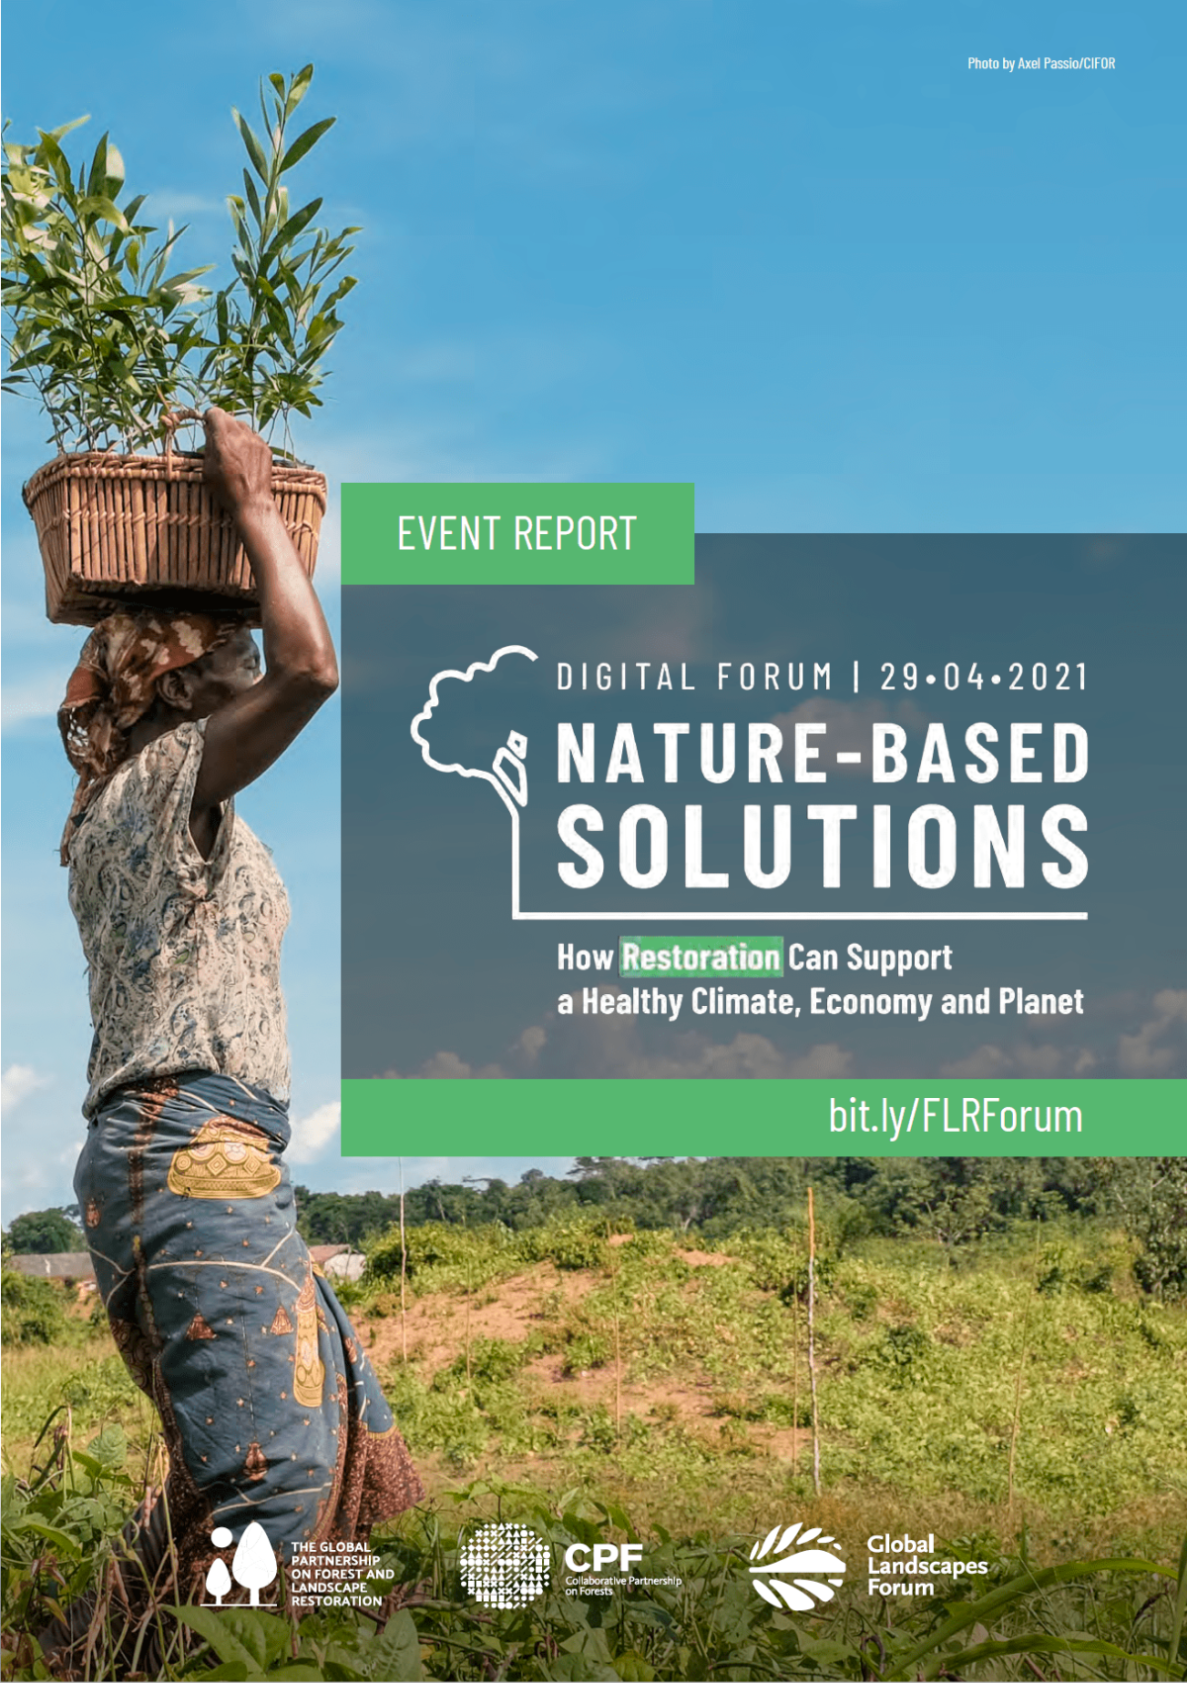 Nature-Based Solutions – How Restoration Can Support a Healthy Climate, Economy and Planet